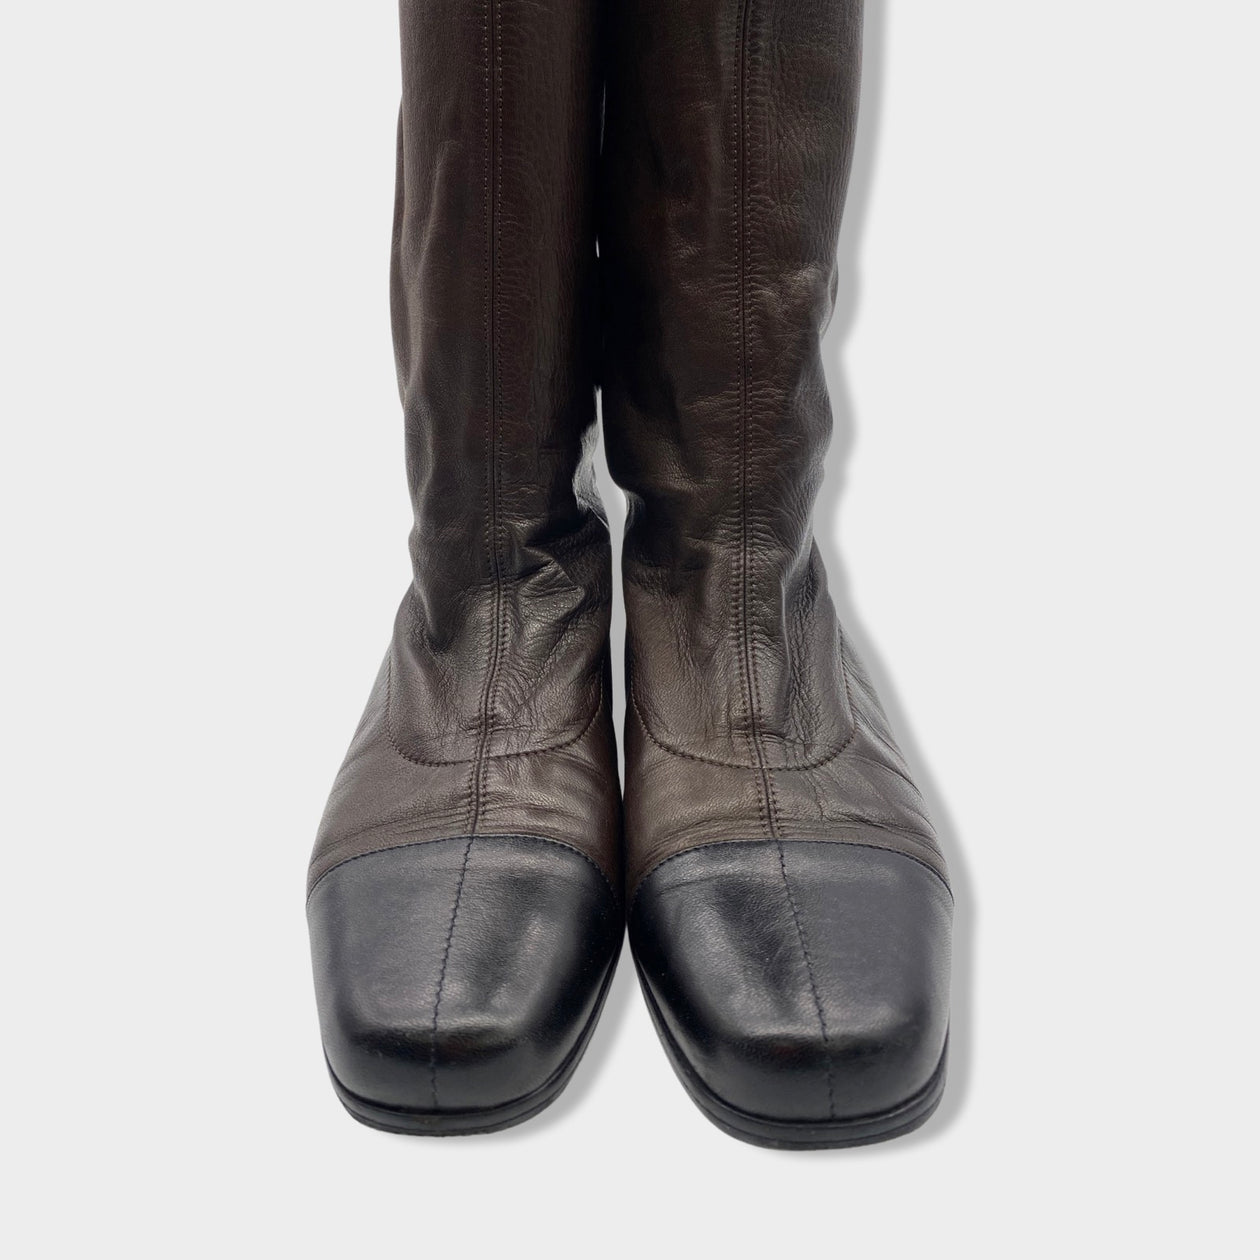 Chanel - Authenticated Boots - Leather Black Plain for Women, Very Good Condition